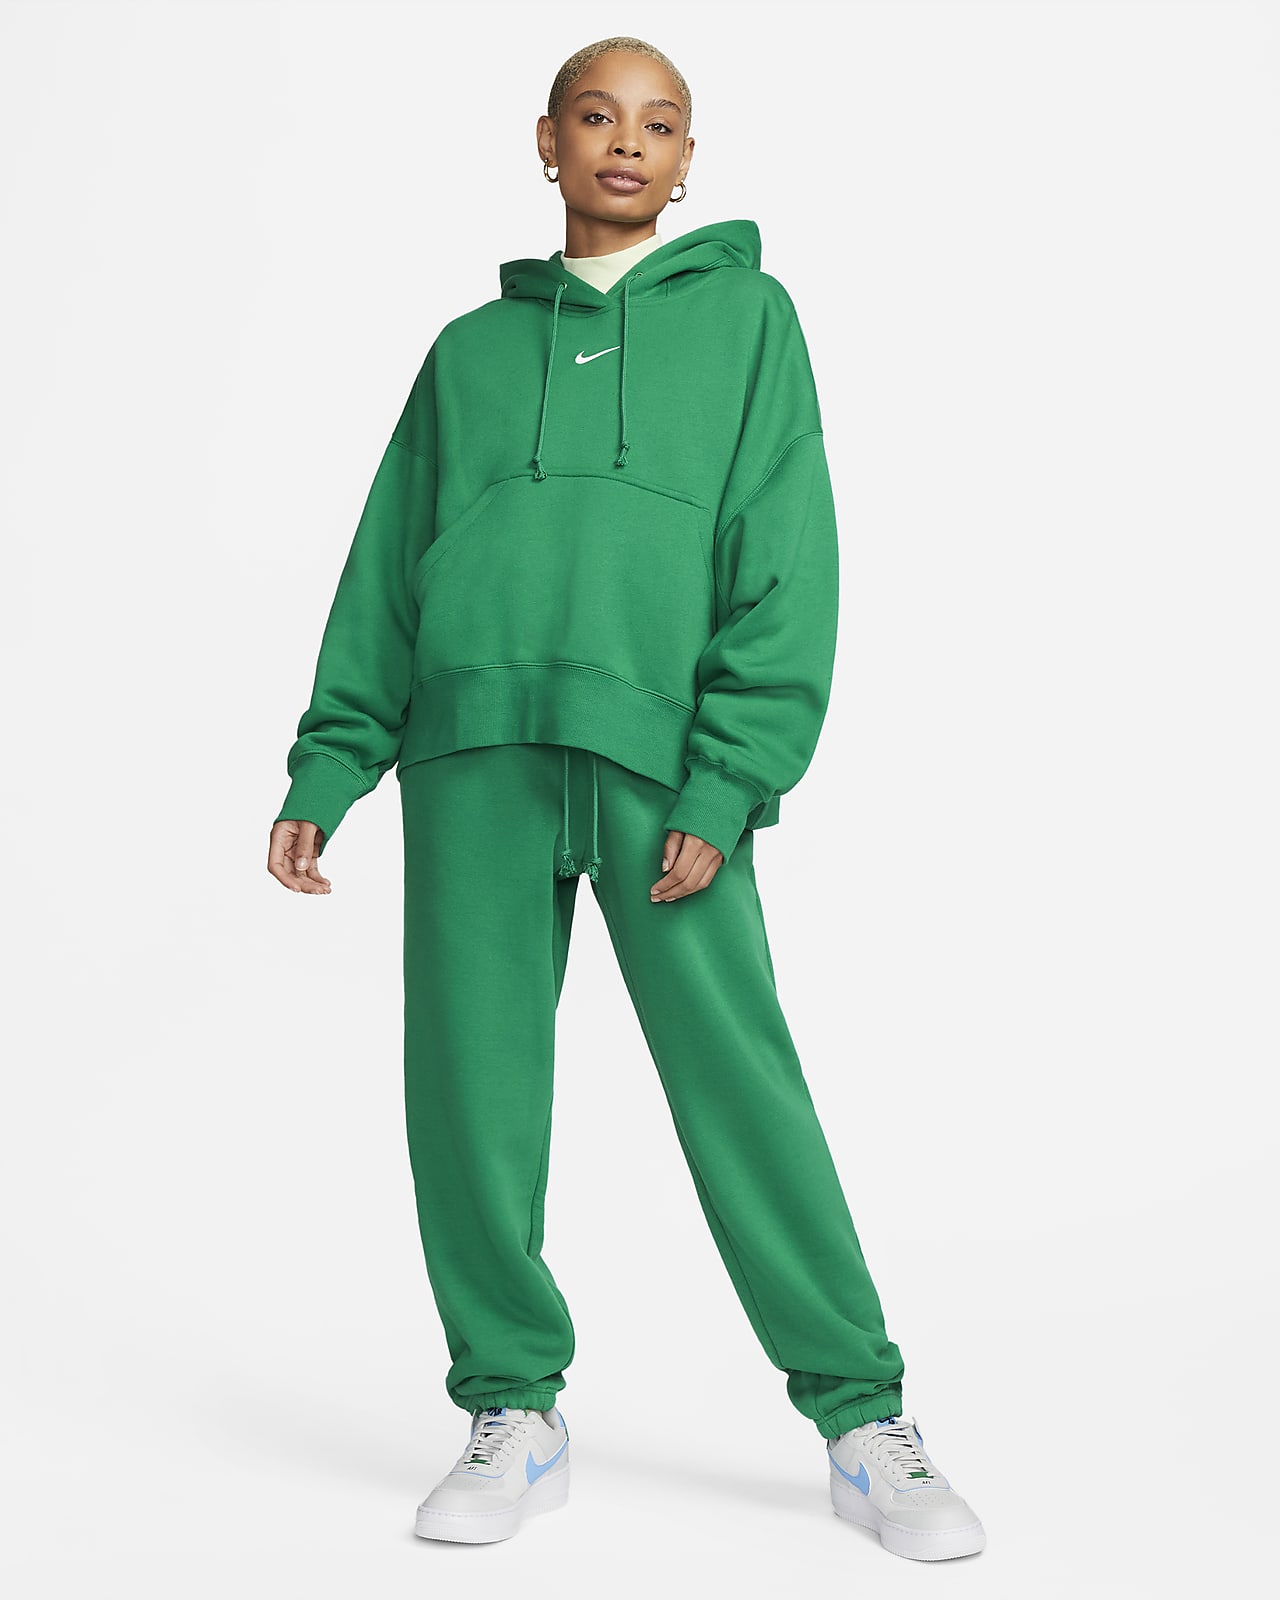 https://static.nike.com/a/images/t_PDP_1280_v1/f_auto,q_auto:eco/fd4d5878-ff77-4fe6-9a57-cdaeff1139cc/sportswear-phoenix-fleece-womens-over-oversized-pullover-hoodie-Kqx9H3.png